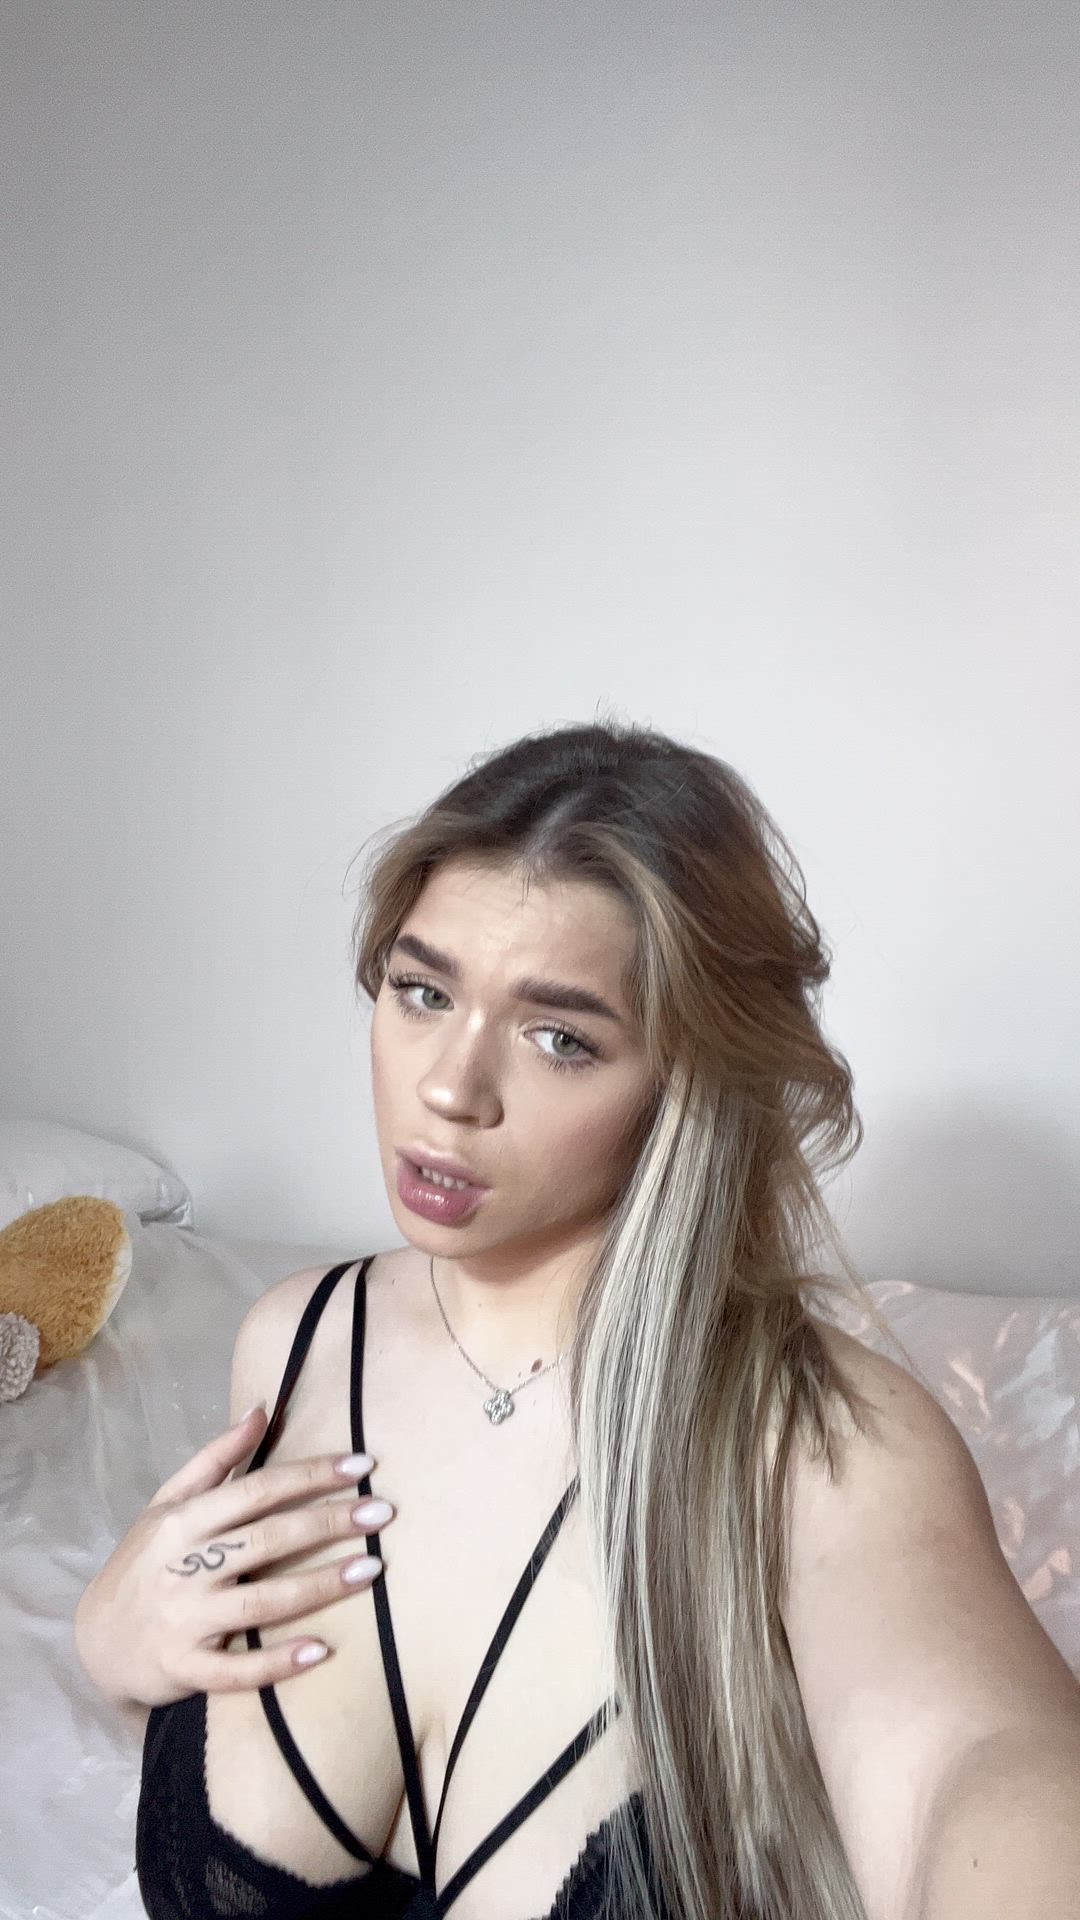 Big Tits porn video with onlyfans model artofboobs <strong>@adeljuggsss</strong>